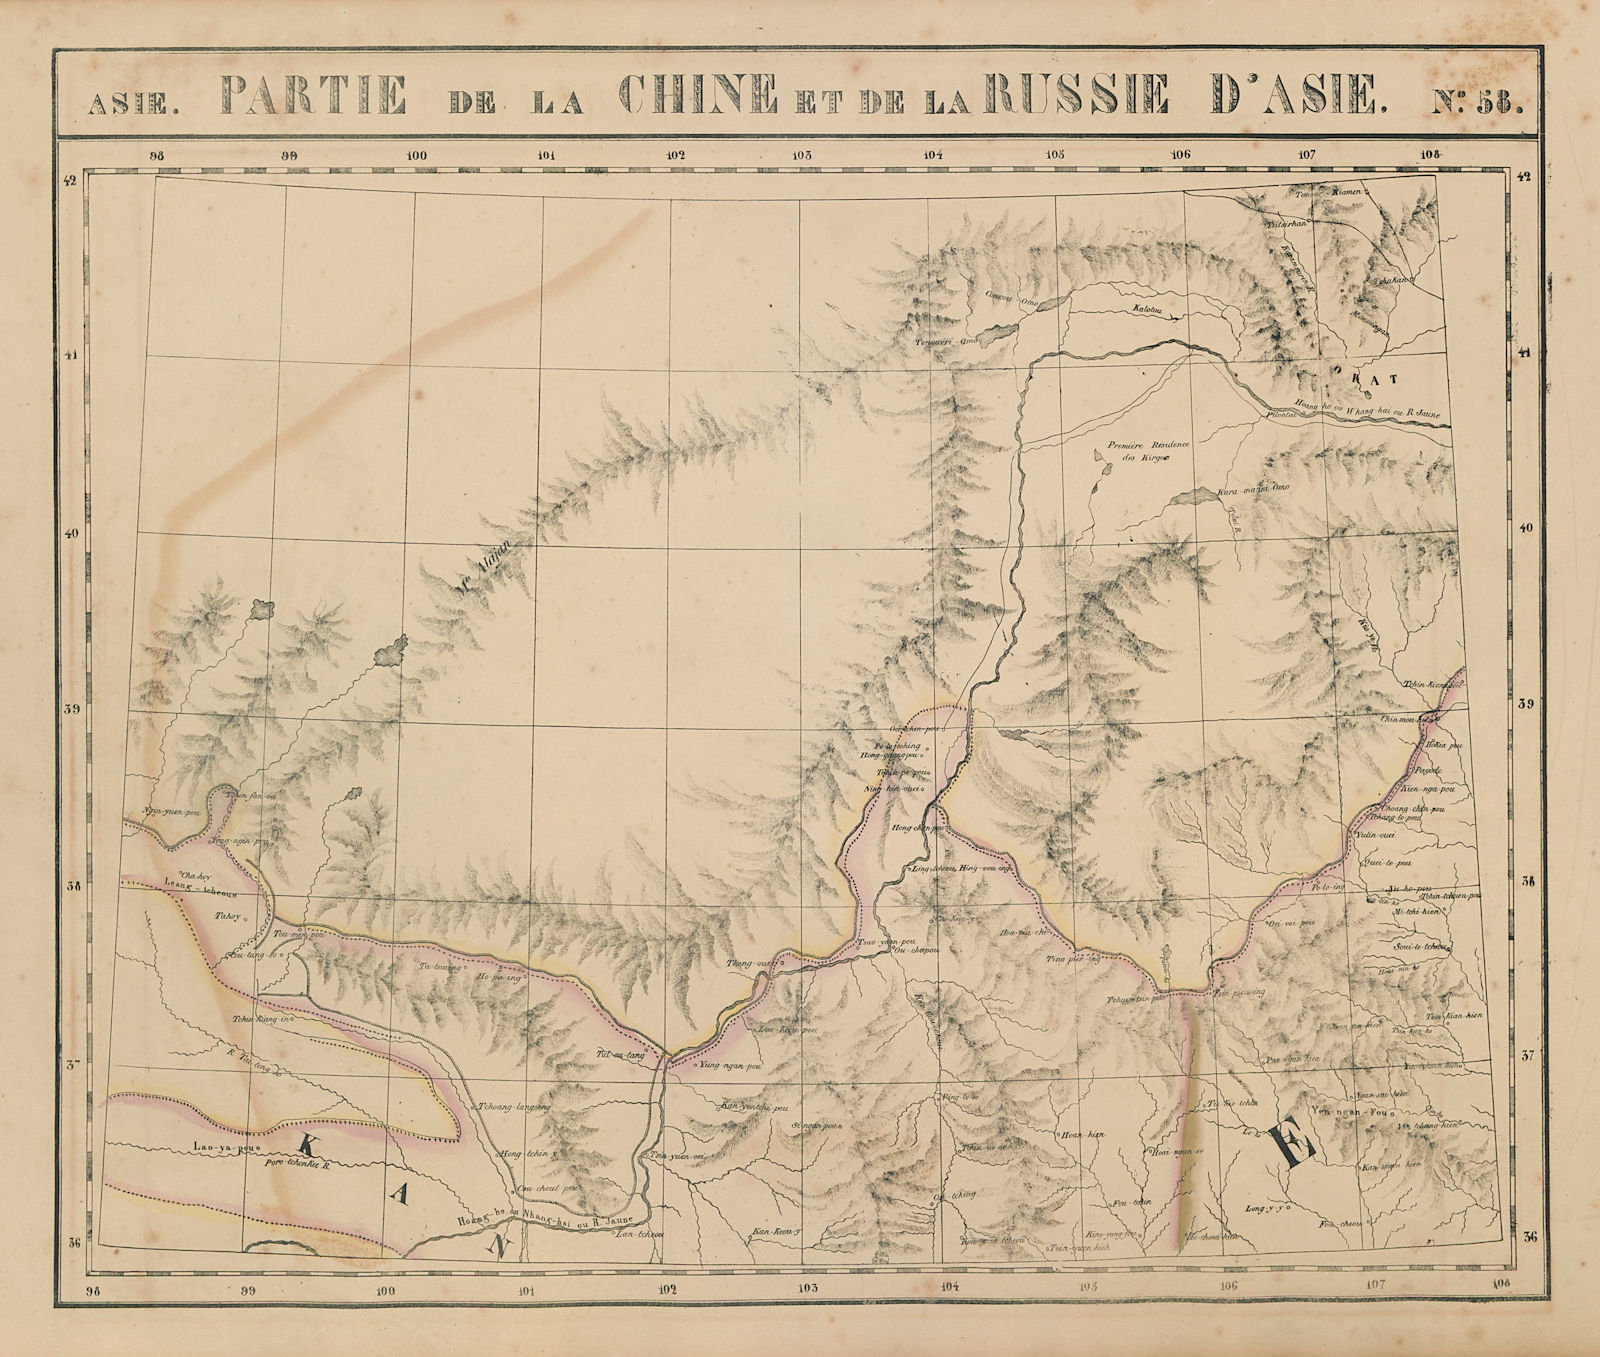 Associate Product Asie. Chine & Russie d'Asie #58 North-central China. VANDERMAELEN 1827 old map